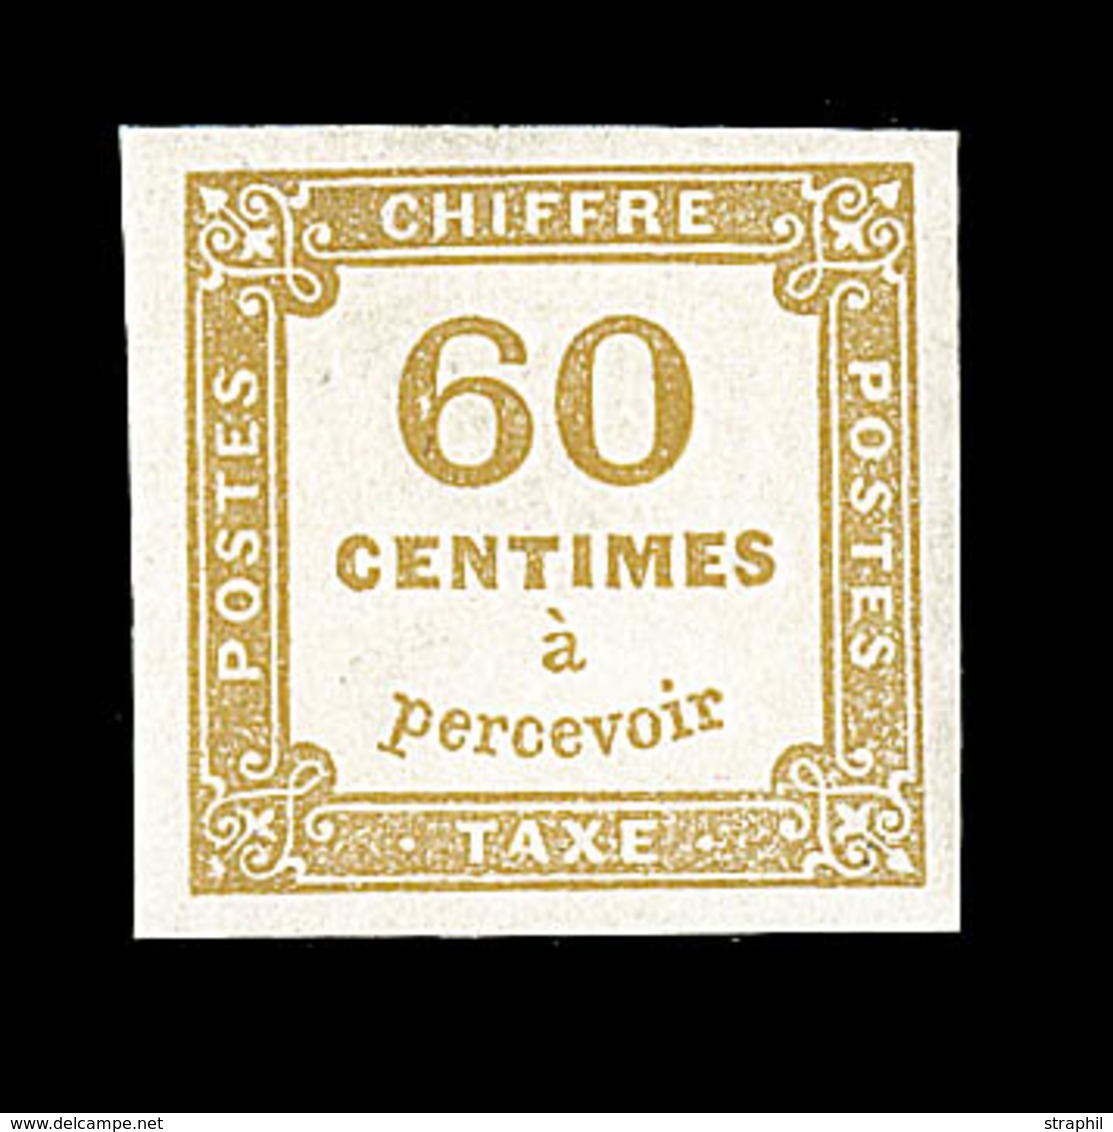 ** TIMBRES TAXE - ** - N°8 - 60c Jaune Bistre - TB - 1859-1959 Mint/hinged